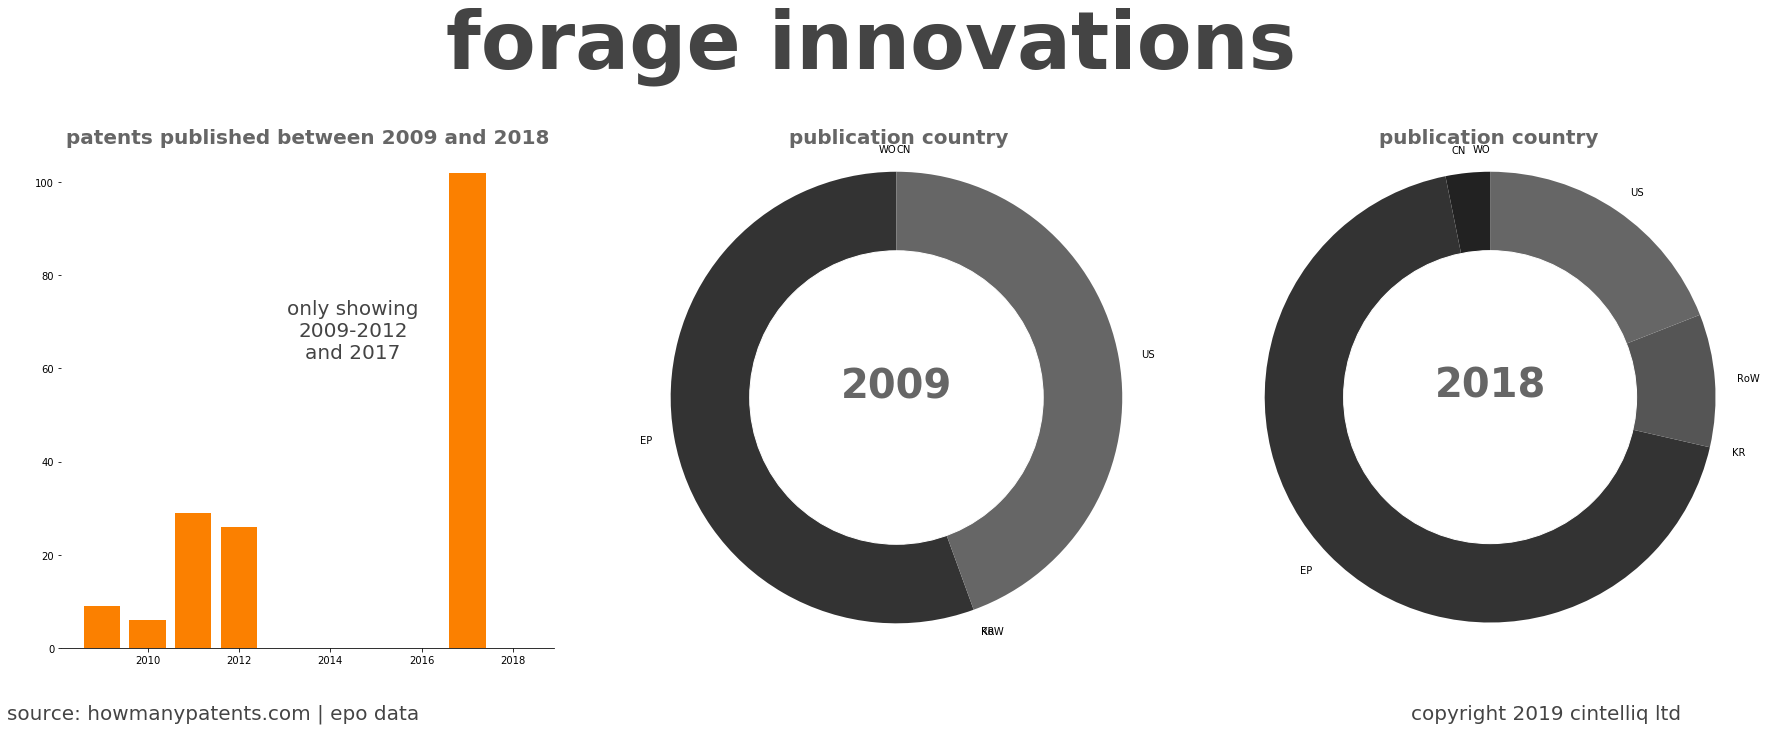 summary of patents for Forage Innovations